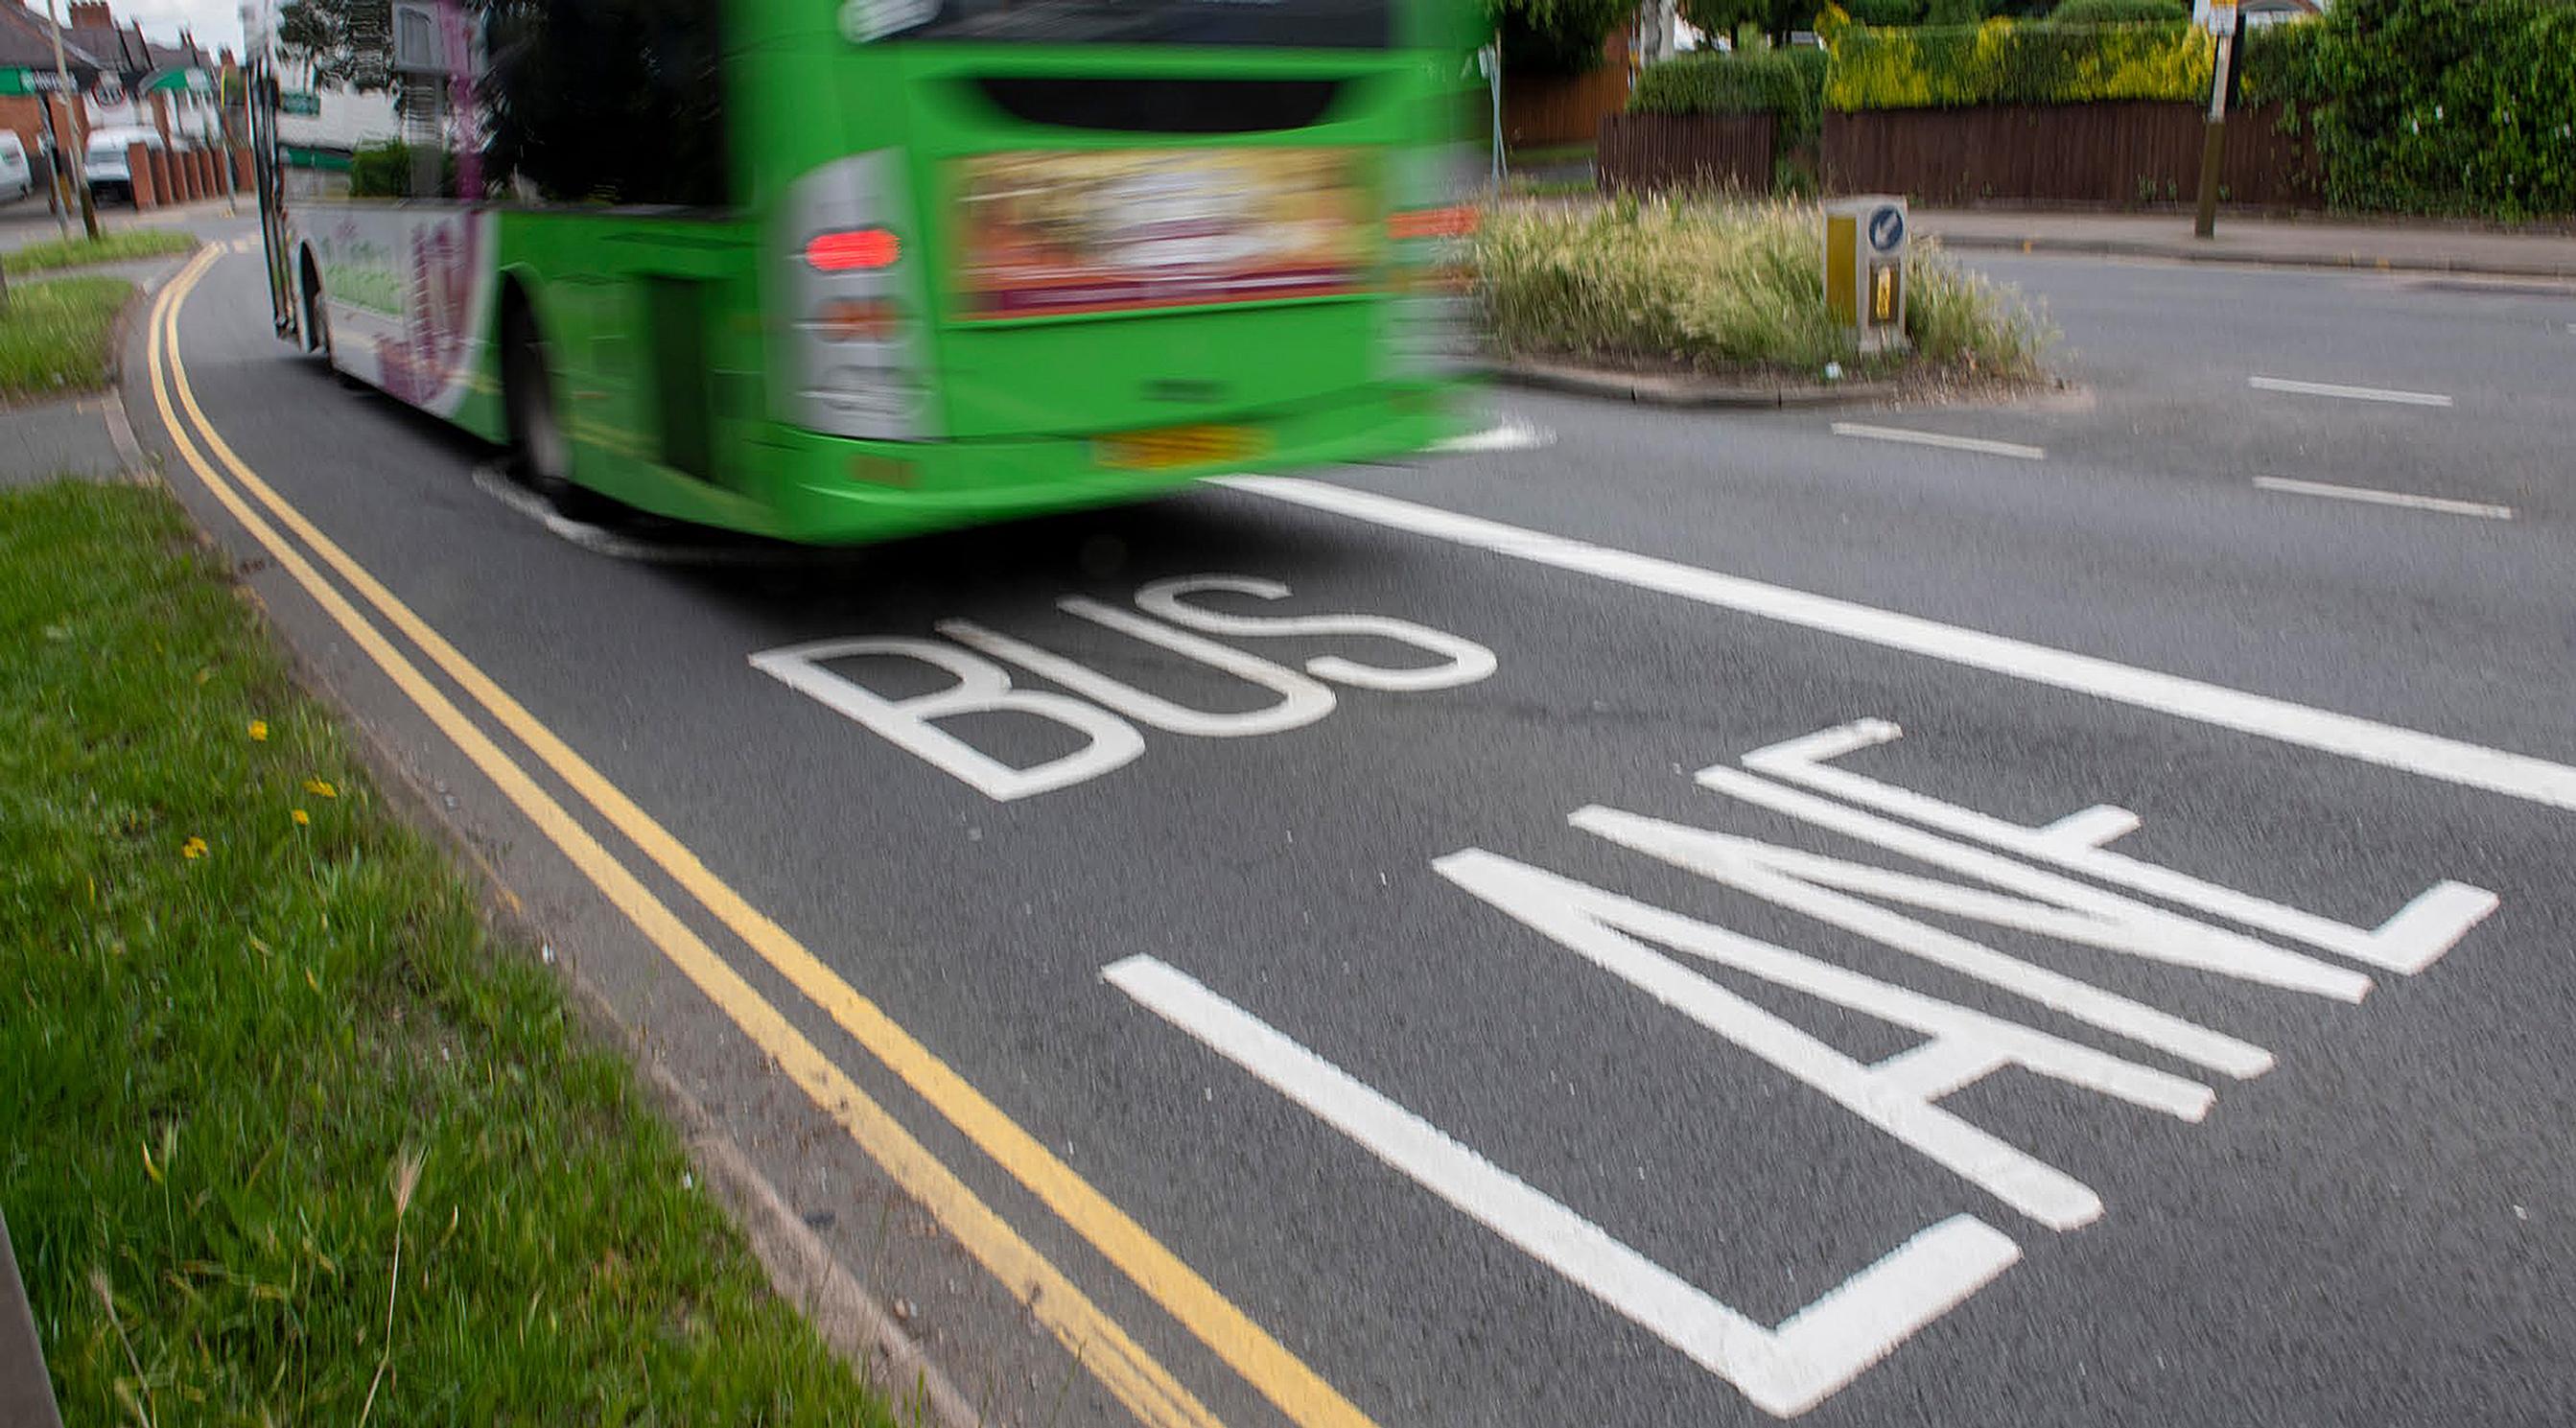 A bus lane in Leicester